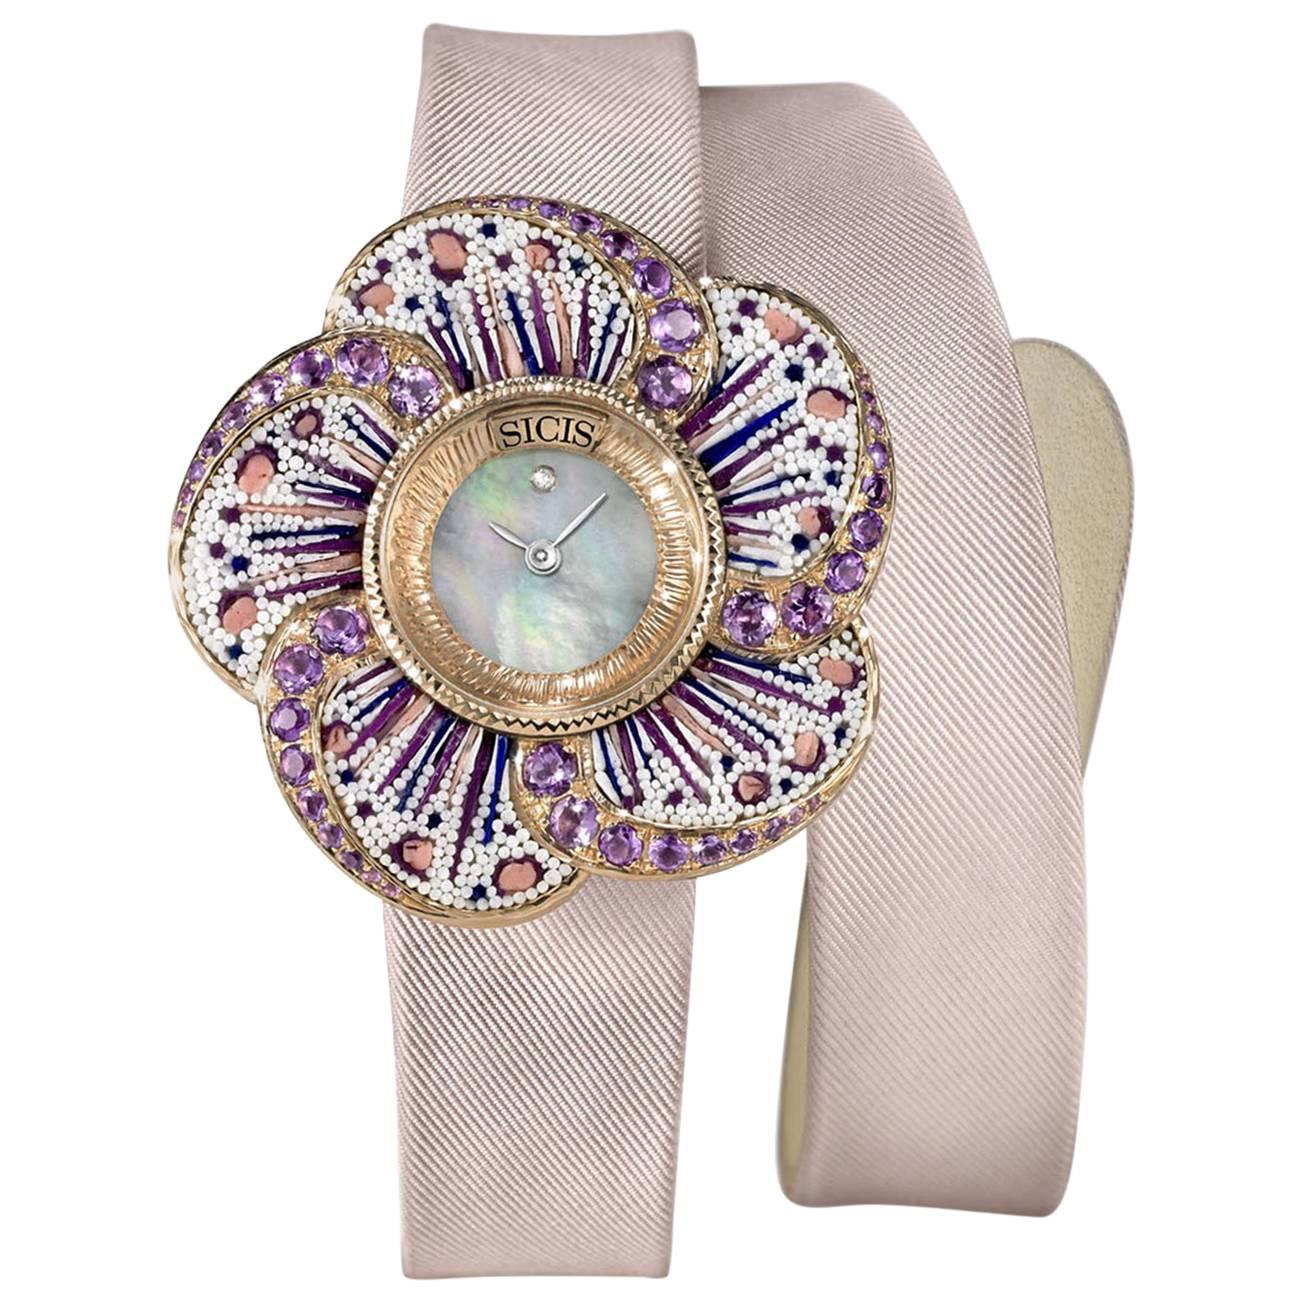 Wristwatch Gold Amethyst White Diamond Mother-of-Pearl Micromosaic Decorated